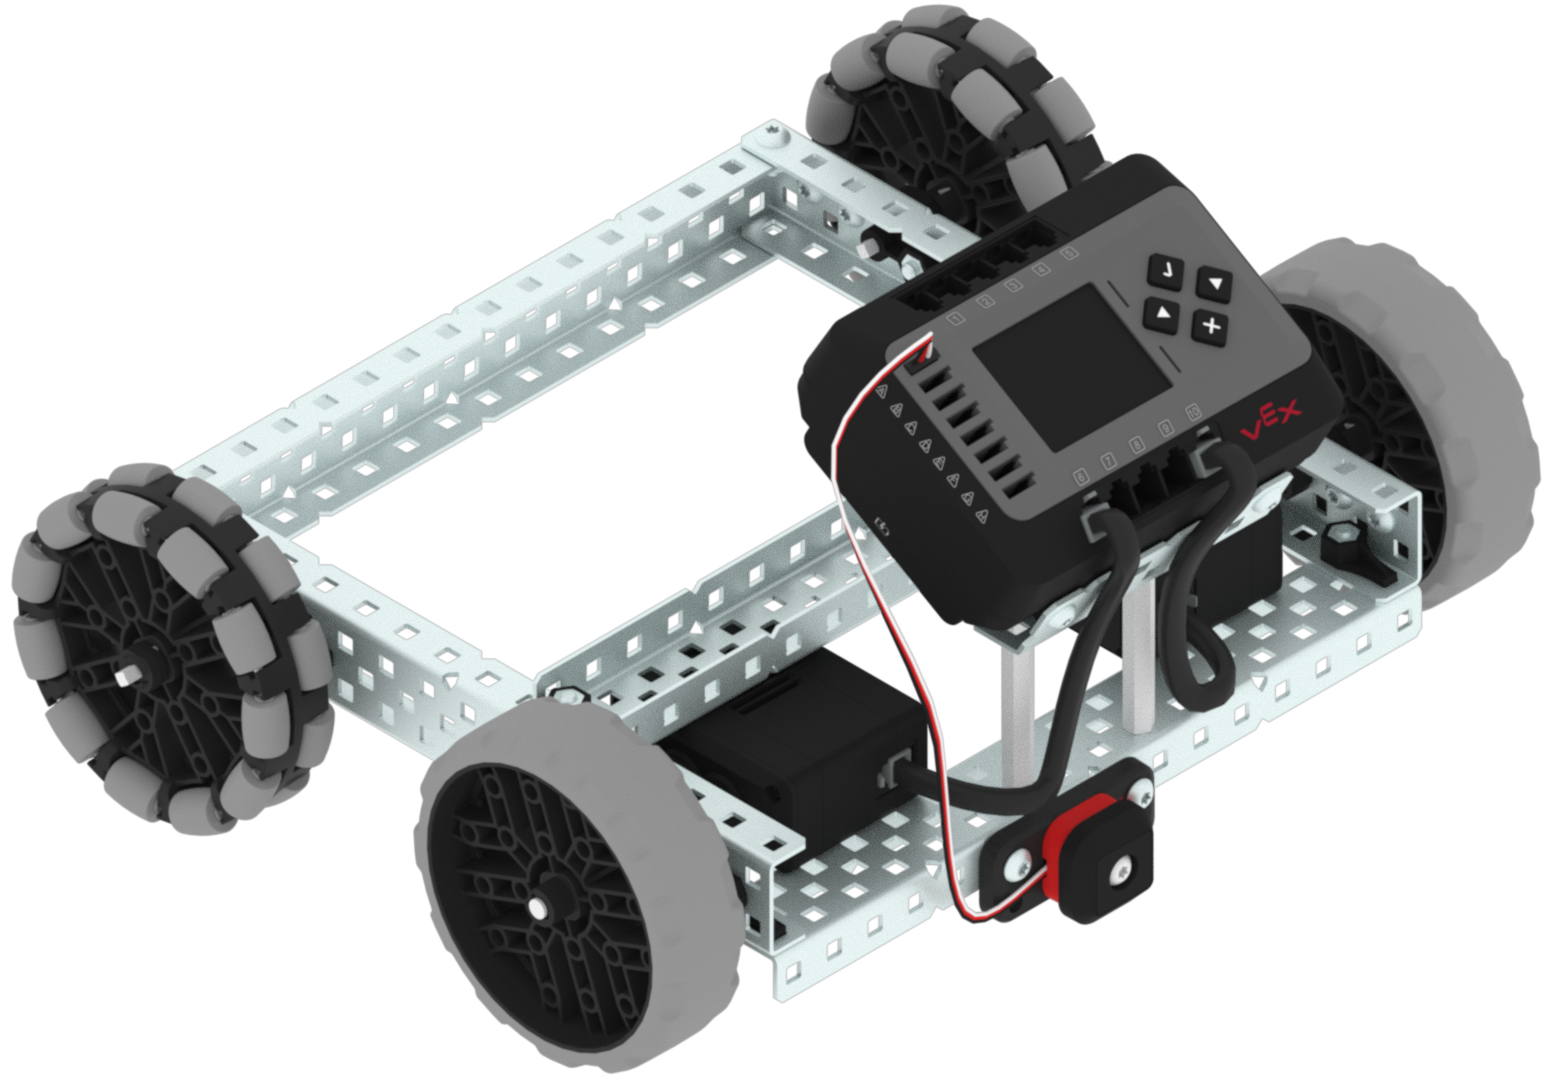 image of the BaseBot with the Bumper added to the back of the robot, and a C-Channel added to the front